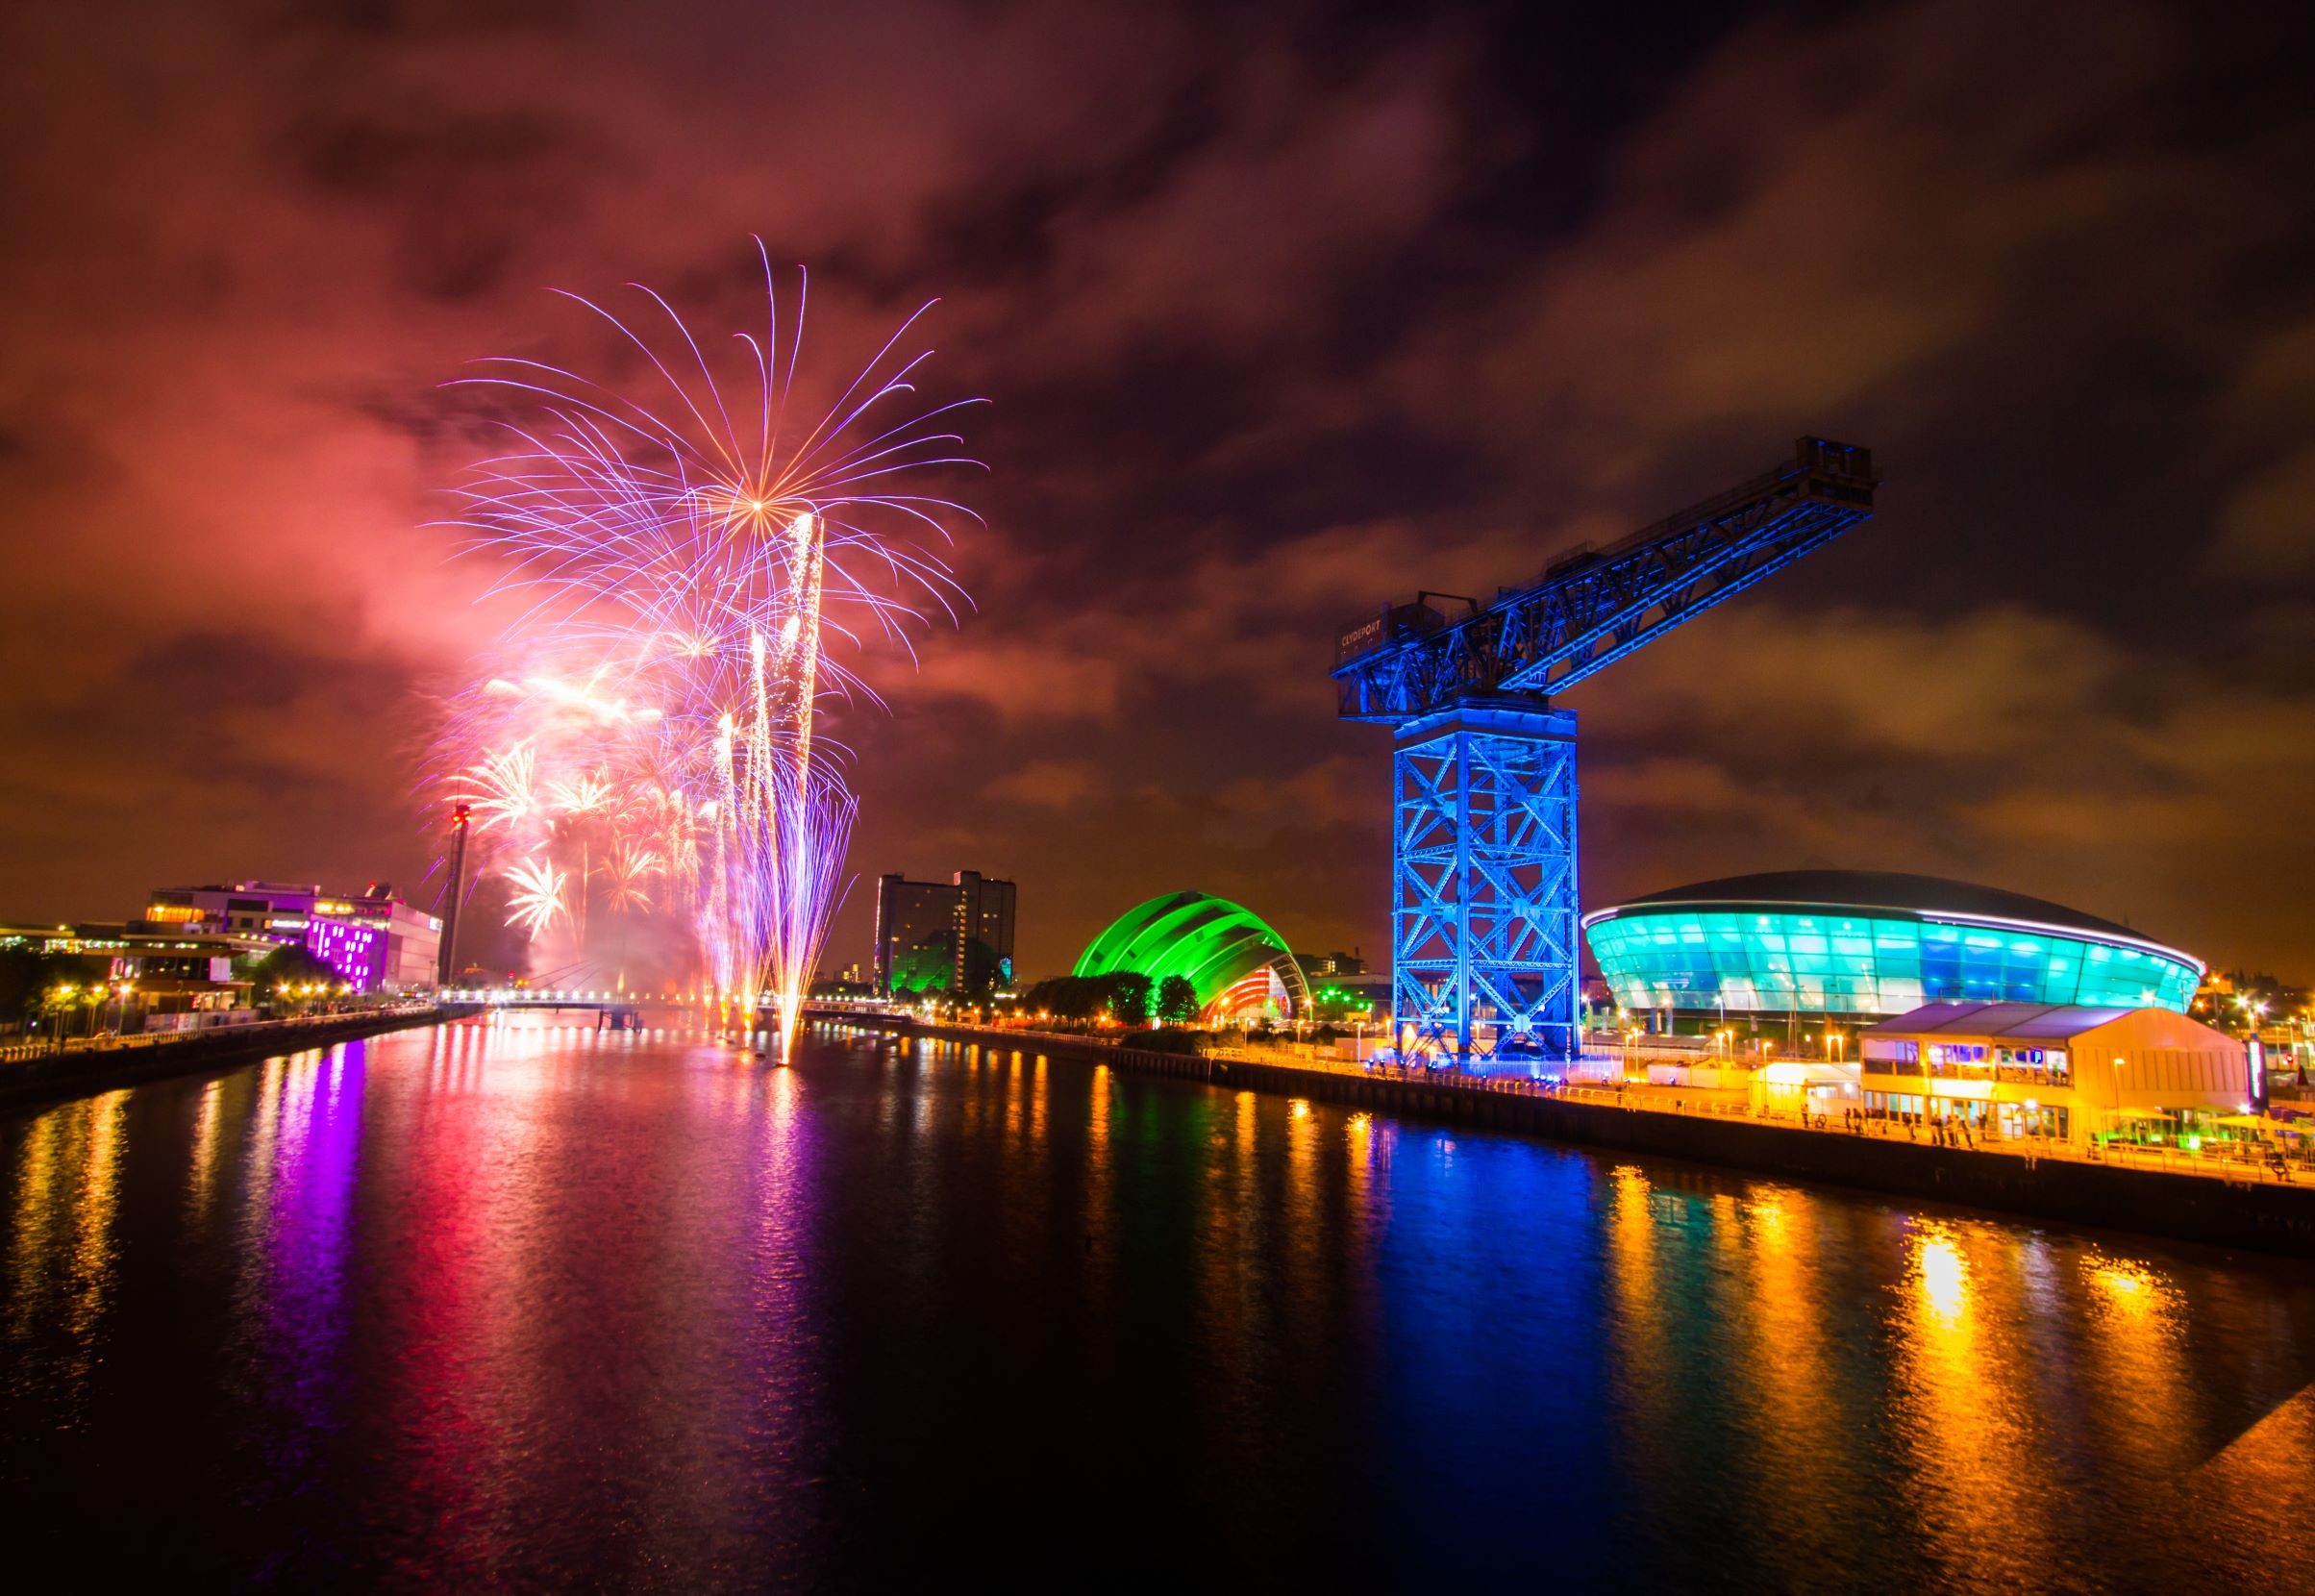 Glasgow's biggest annual events and festivals